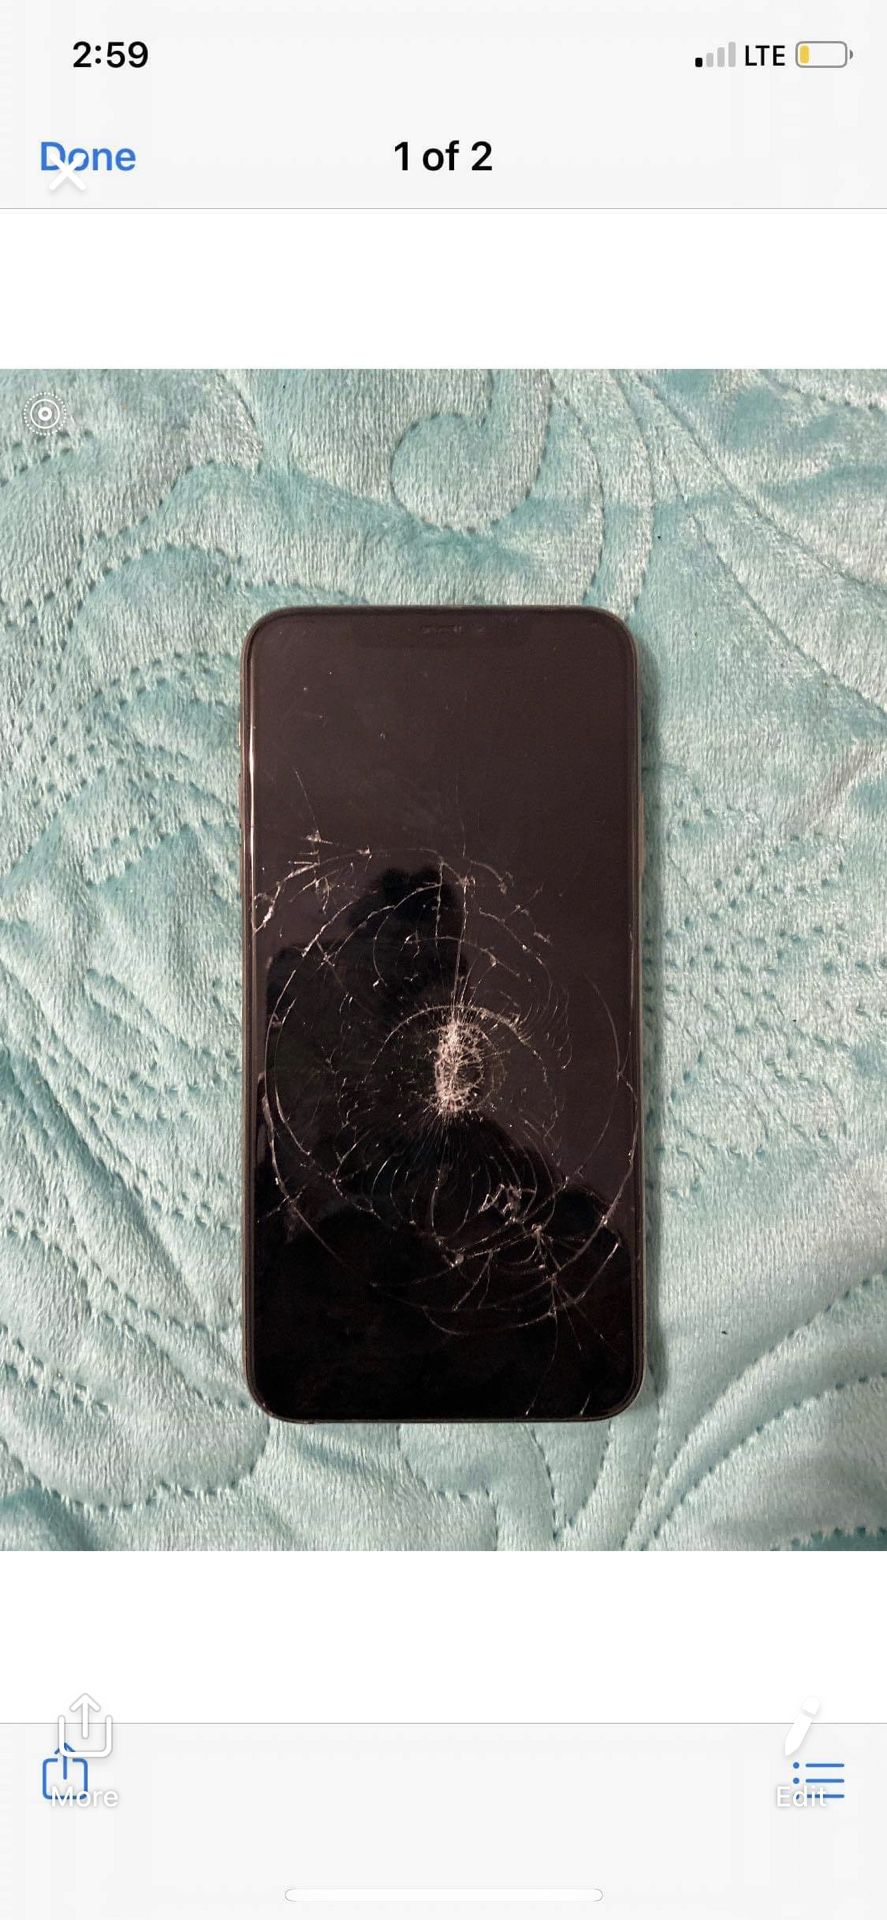 Cracked iPhone 11 Pro Max with cracked led lights